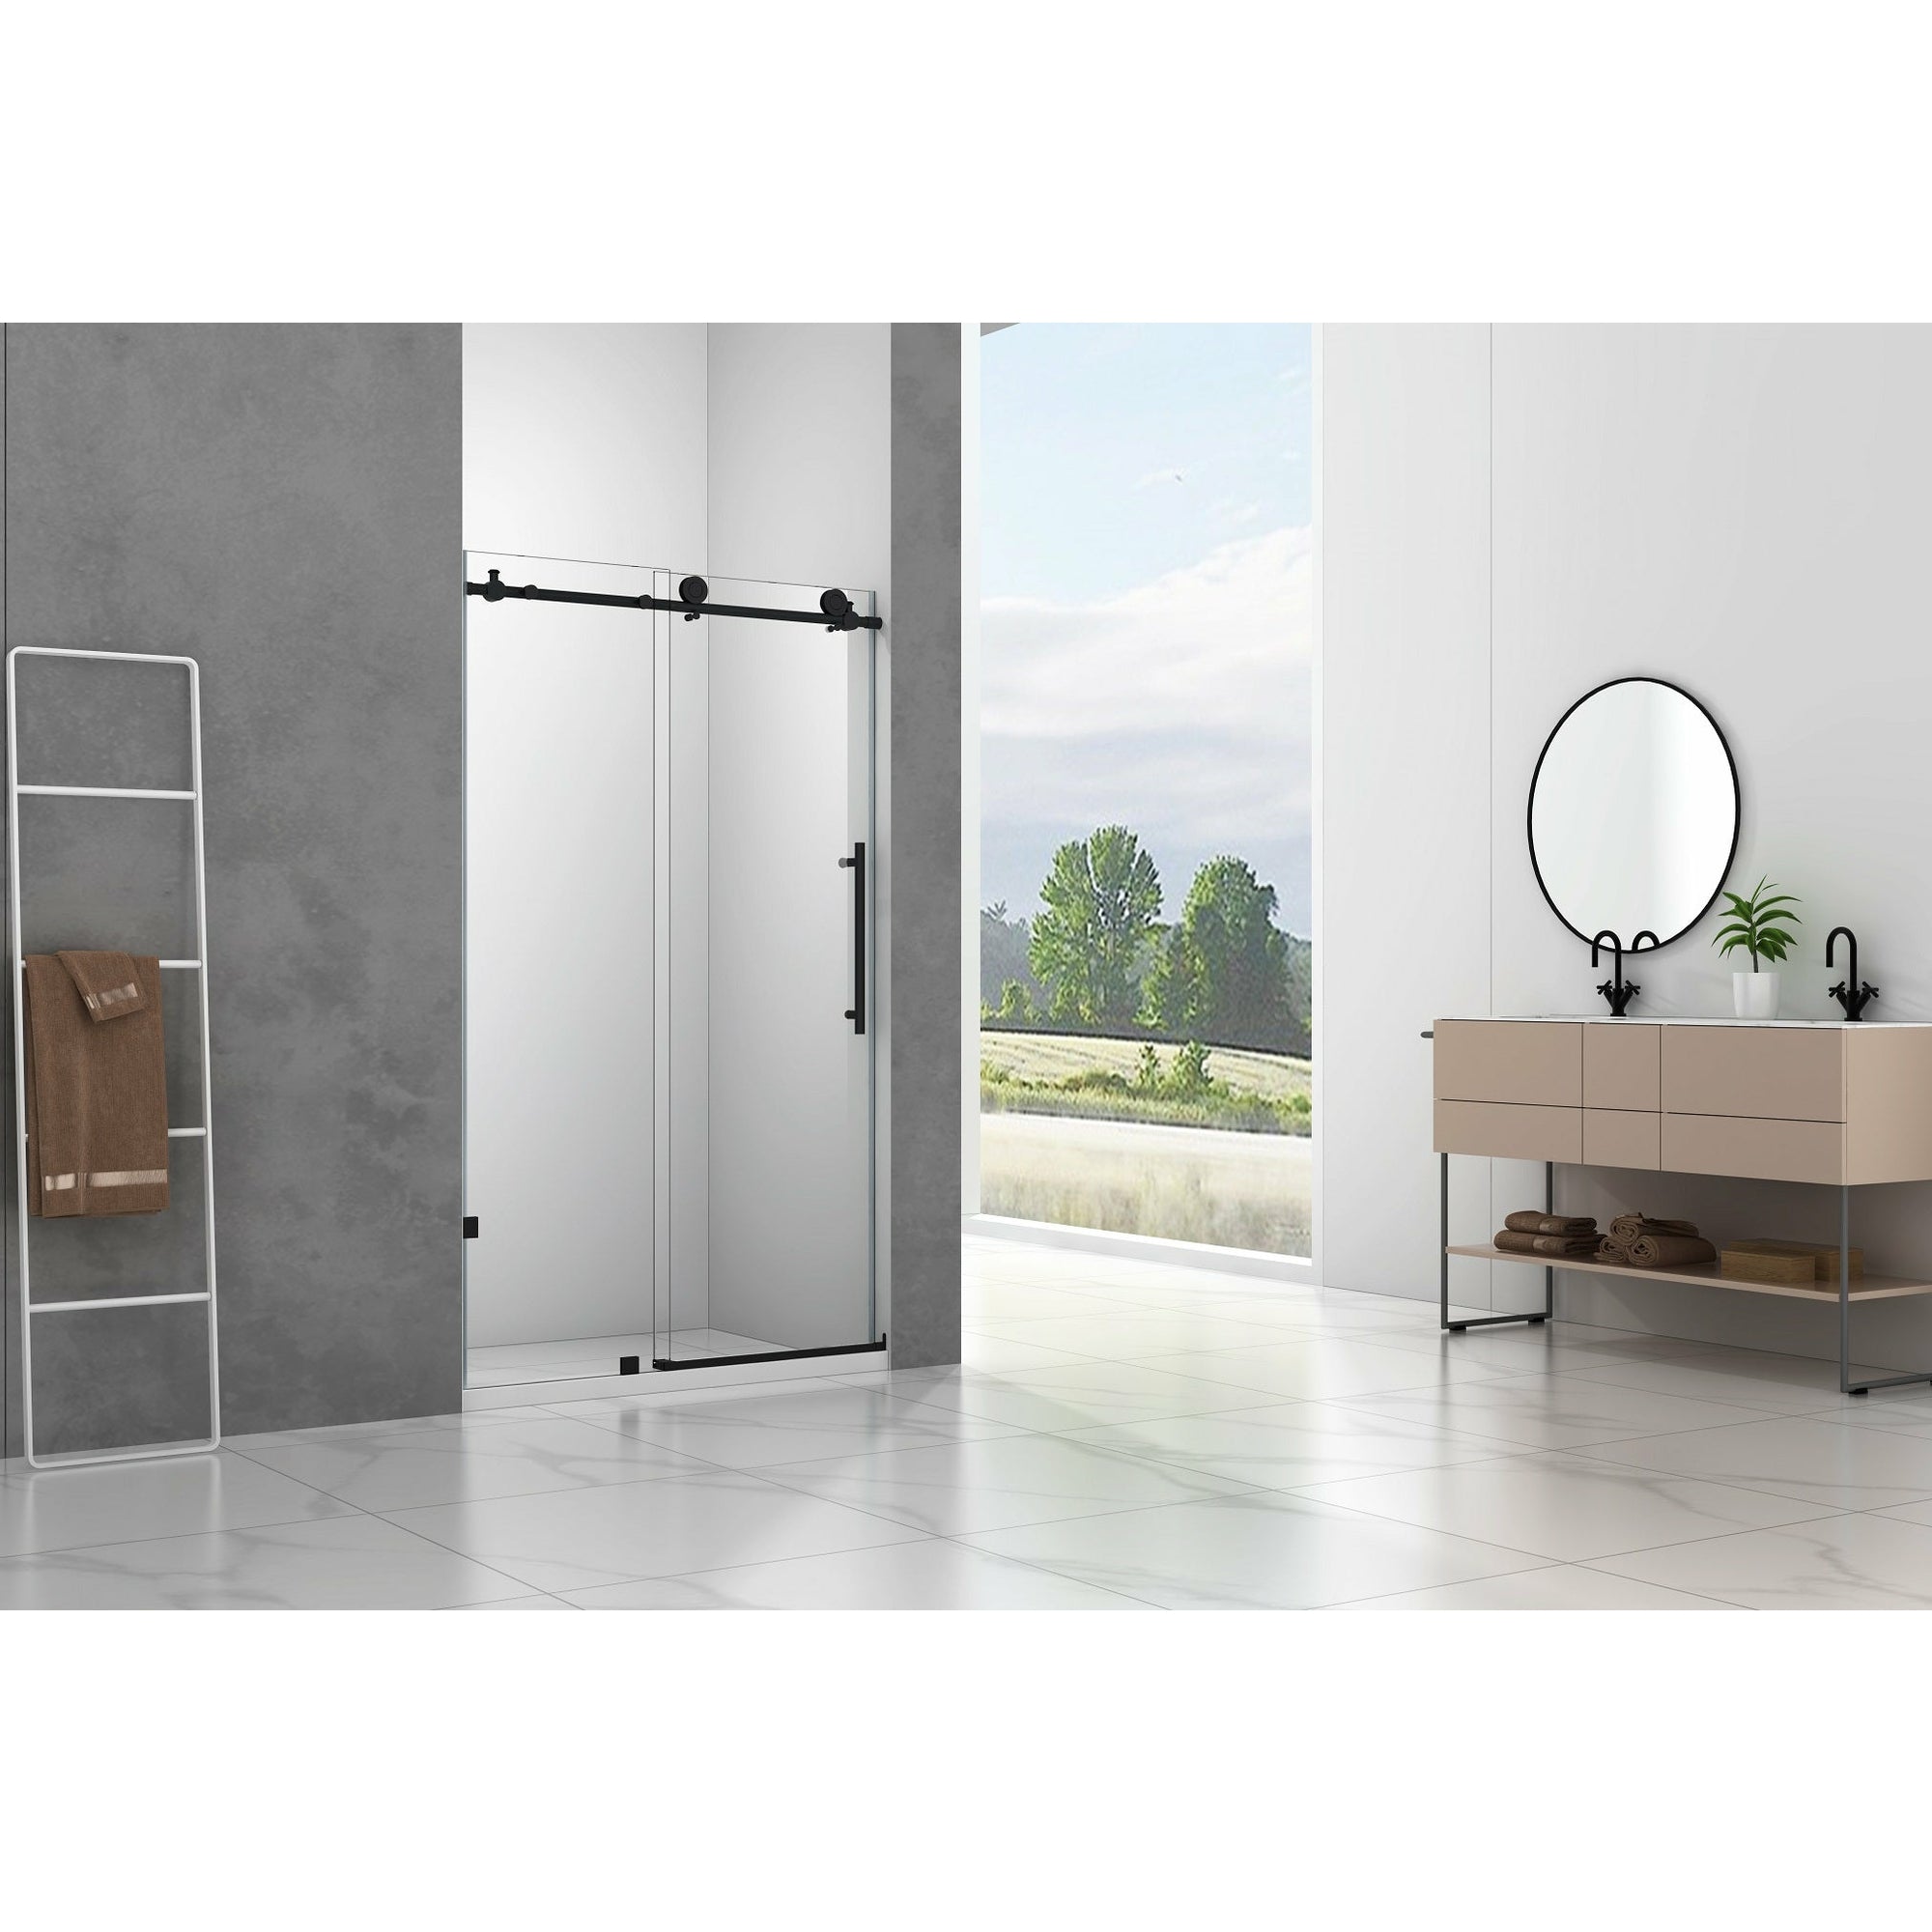 Legion Furniture GD9046-48 46"- 48" Single Sliding Shower Door Set With Hardware - Glass Type: Clear - Stainless Steel Construction - Steel Rollers Closing - Overall Size: 48″ W X 75″ H - Lifestyle setting - GD9046-48 - Vital Hydrotherapy